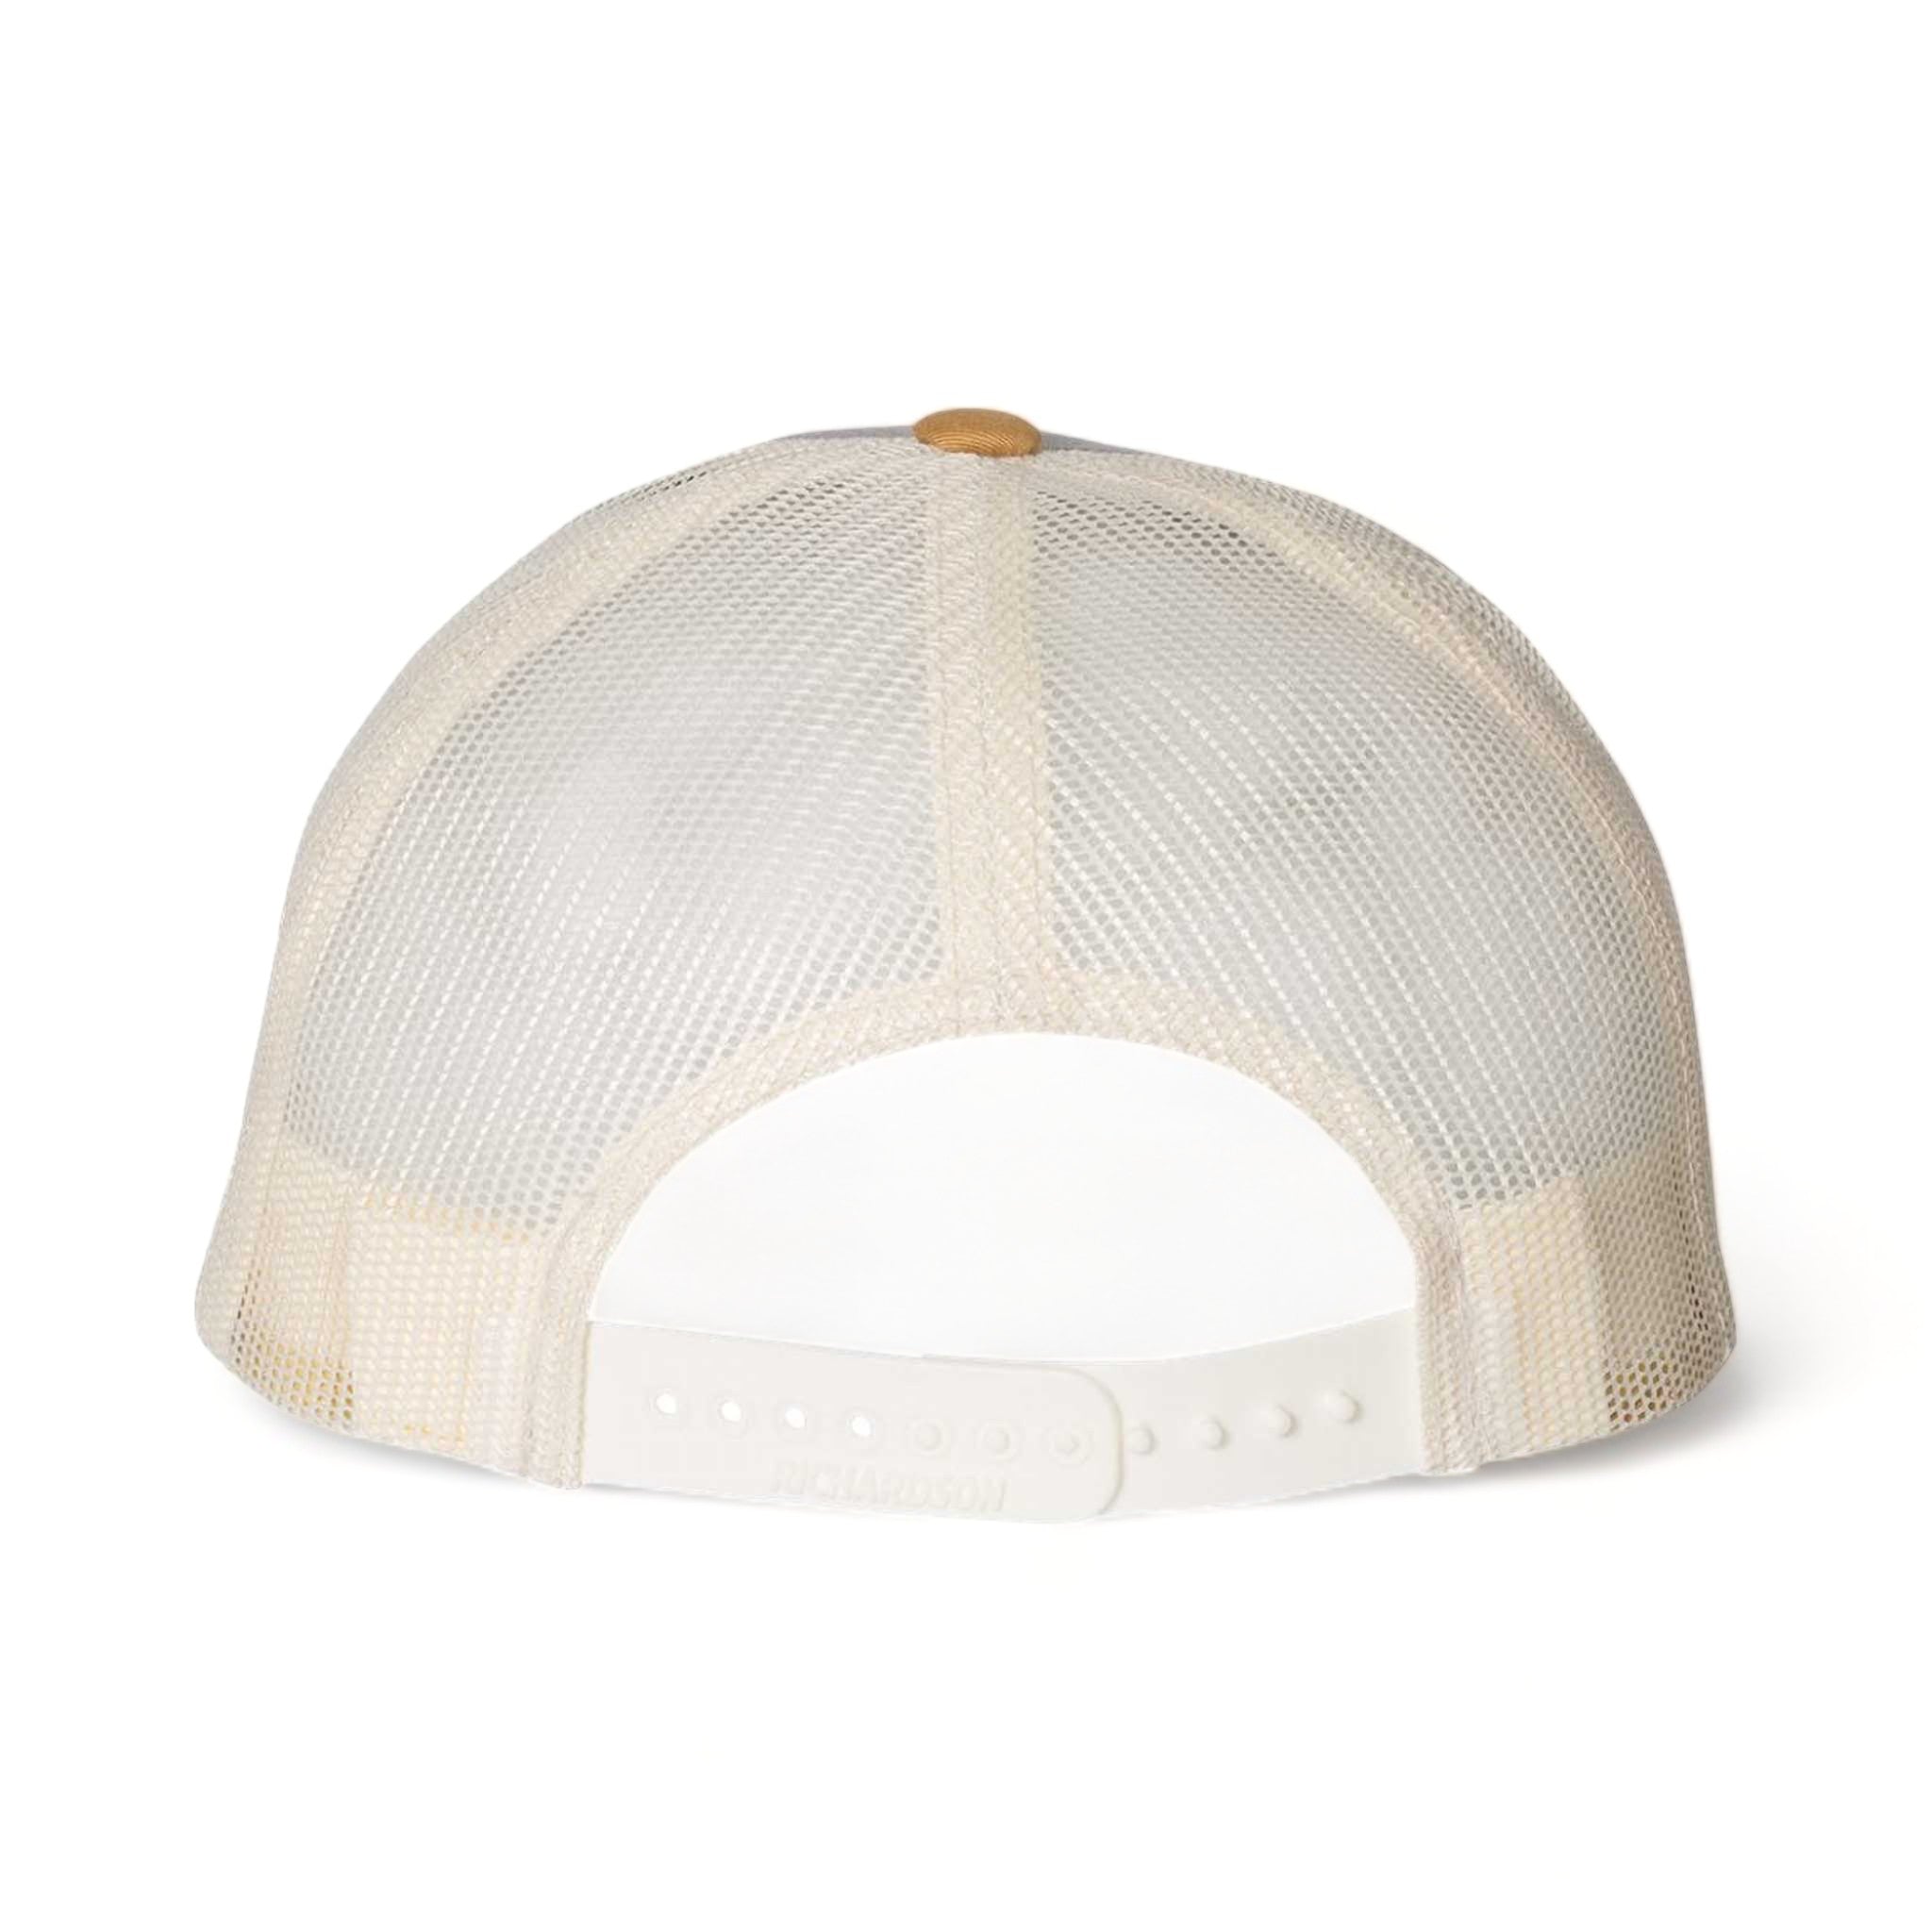 Back view of Richardson 115 custom hat in heather grey, birch and amber gold